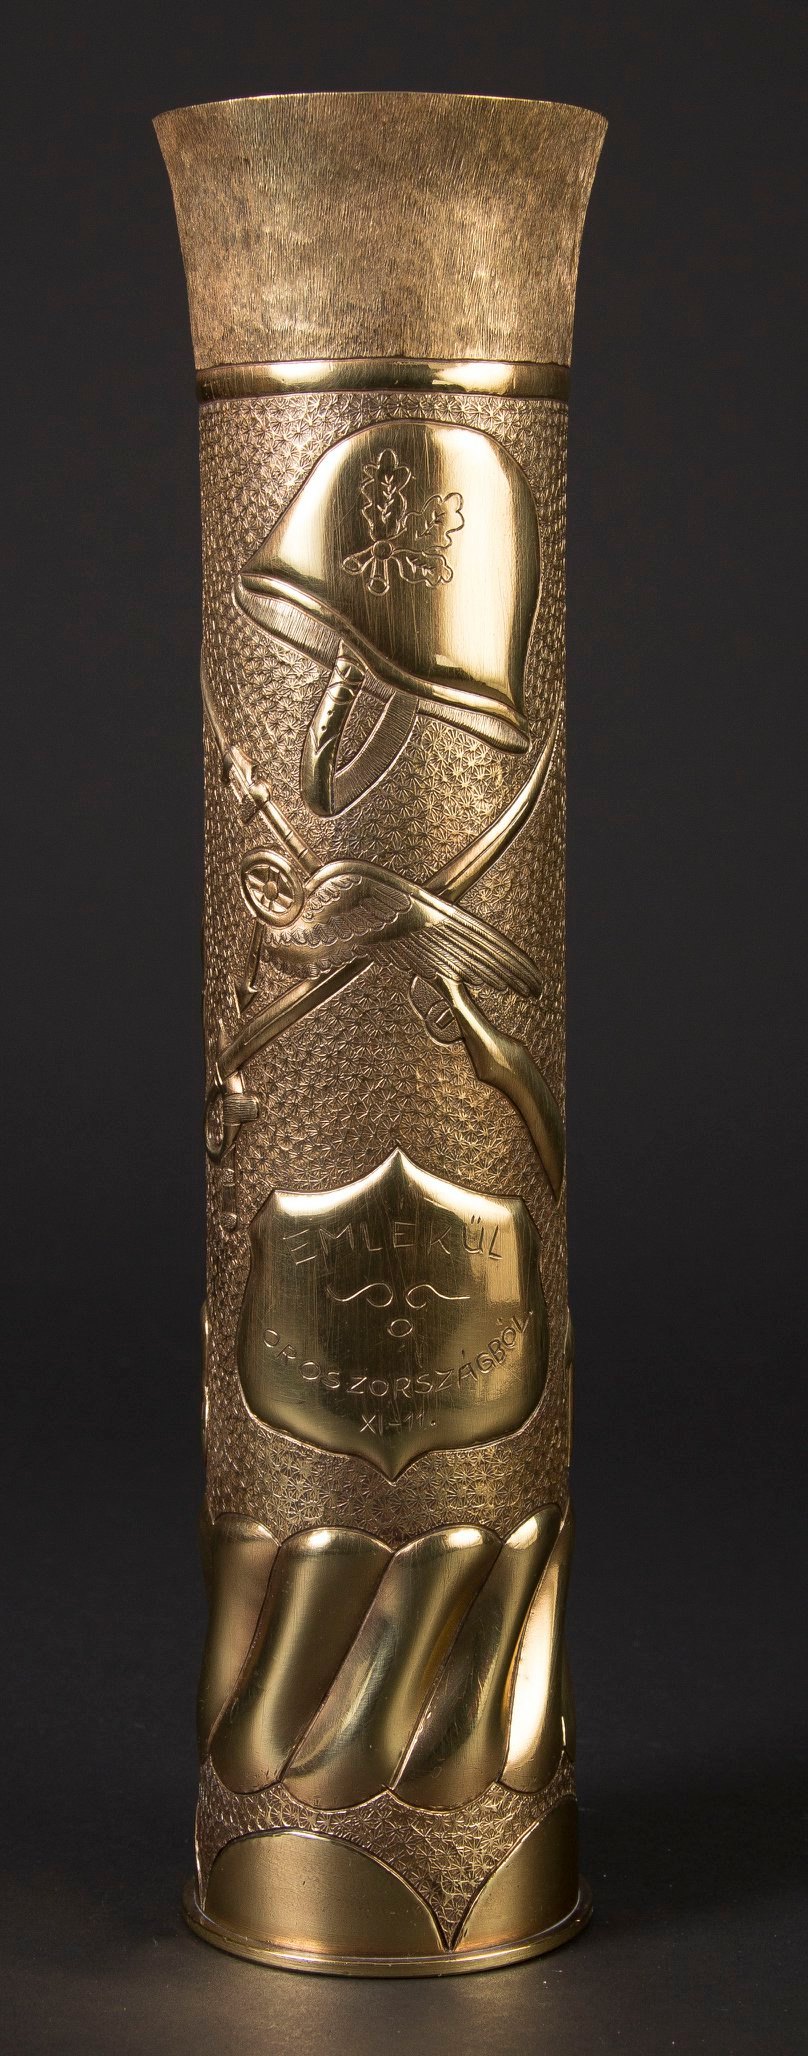 From Swords to Plowshares: World War II Metal Trench Art